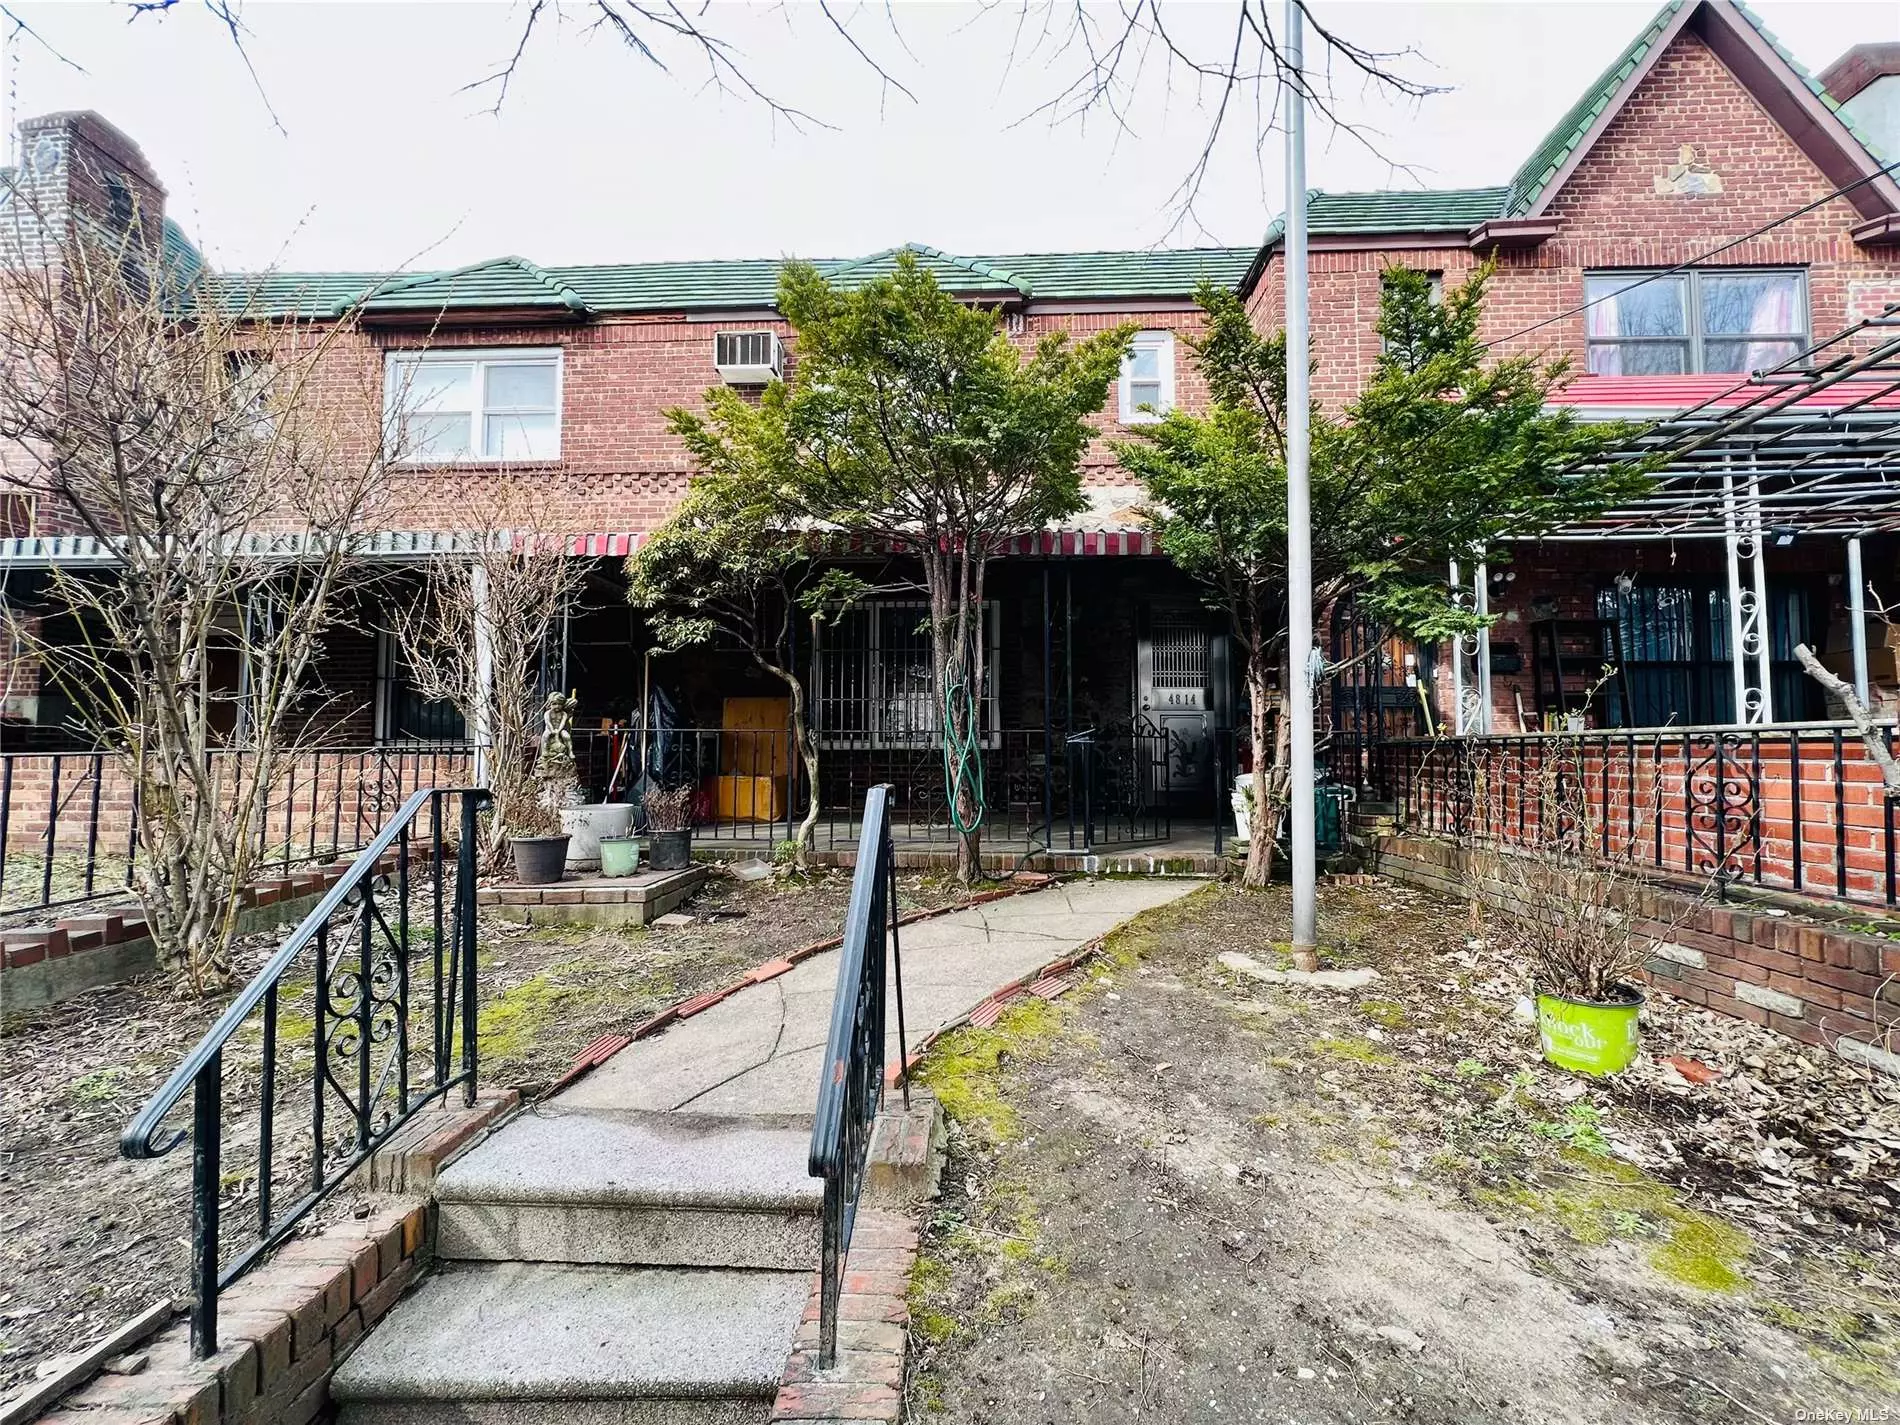 Attached single family home, solid brick, in a great Woodside location bordering Maspeth. Built a spacious 20&rsquo; wide by 35&rsquo; deep, this colonial features 3 bedrooms upstairs, living room, formal dining room and kitchen on the 1st floor and a full sized basement.